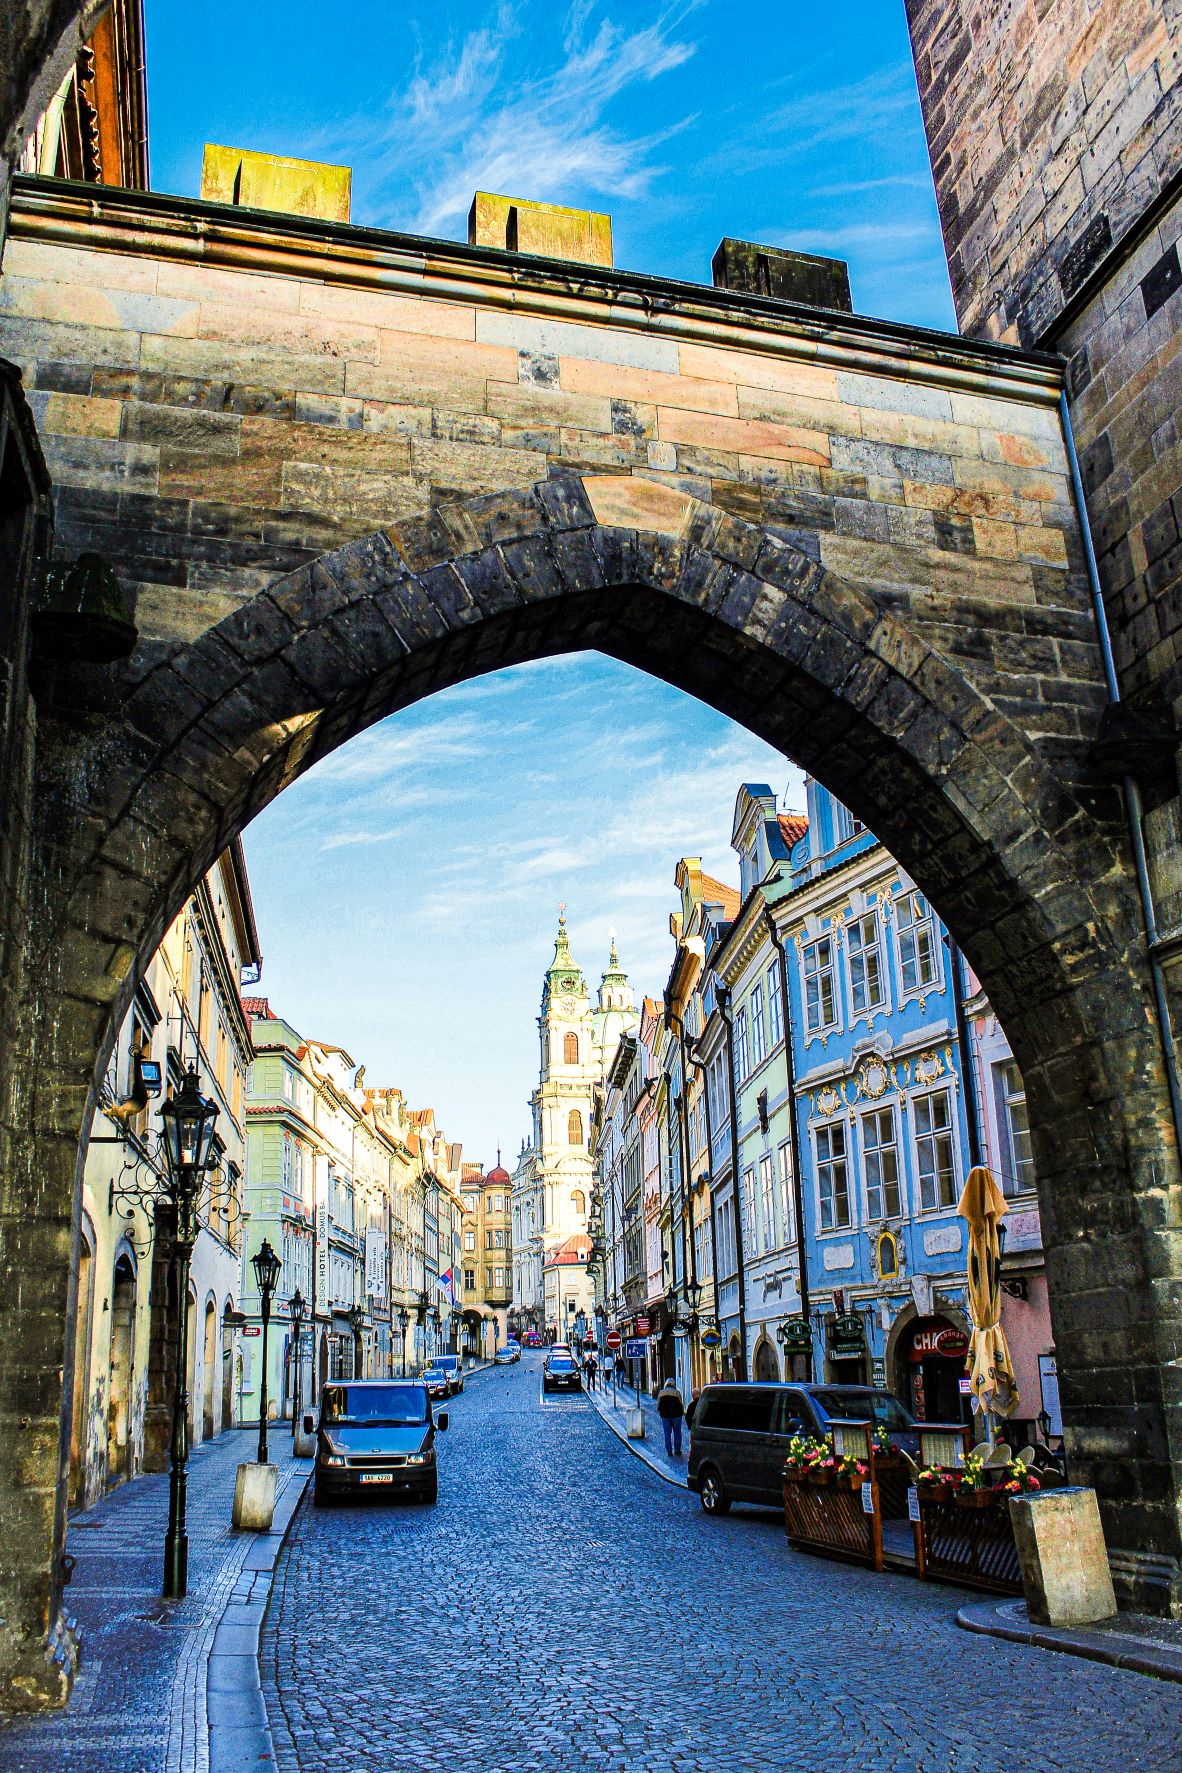 stone archway with cobblestone road